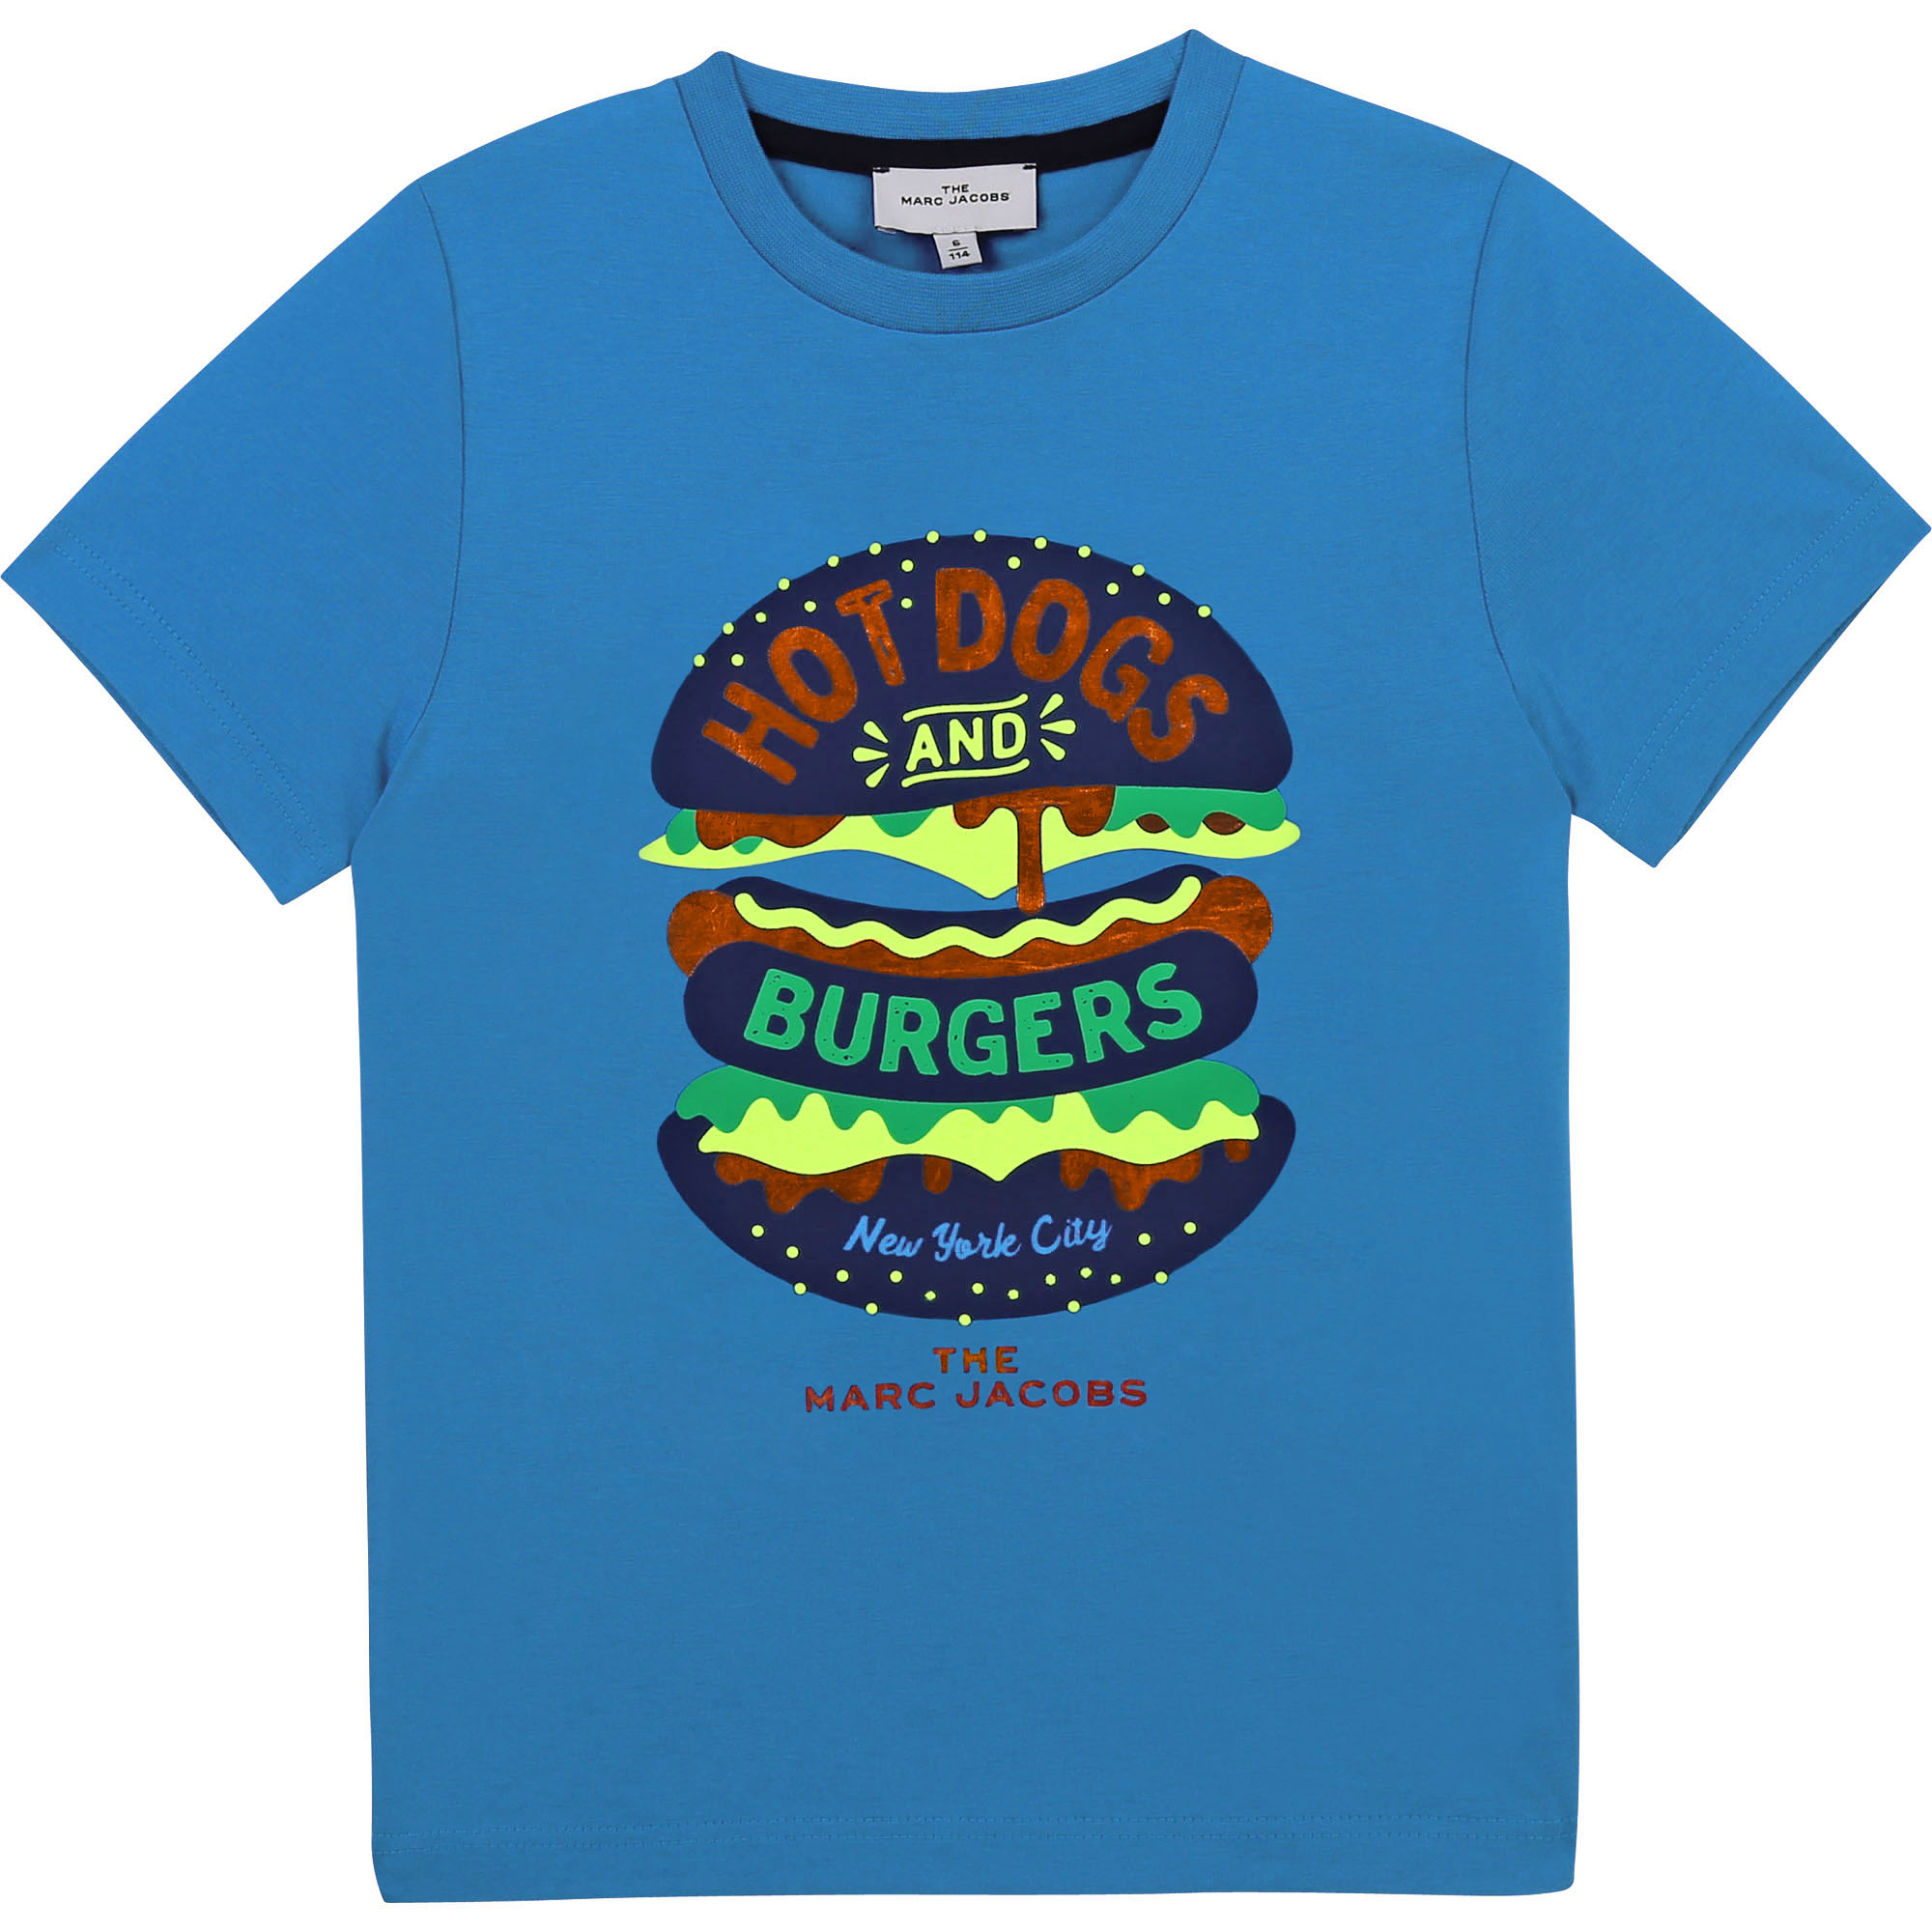 Printed cotton jersey T-shirt MARC JACOBS for BOY